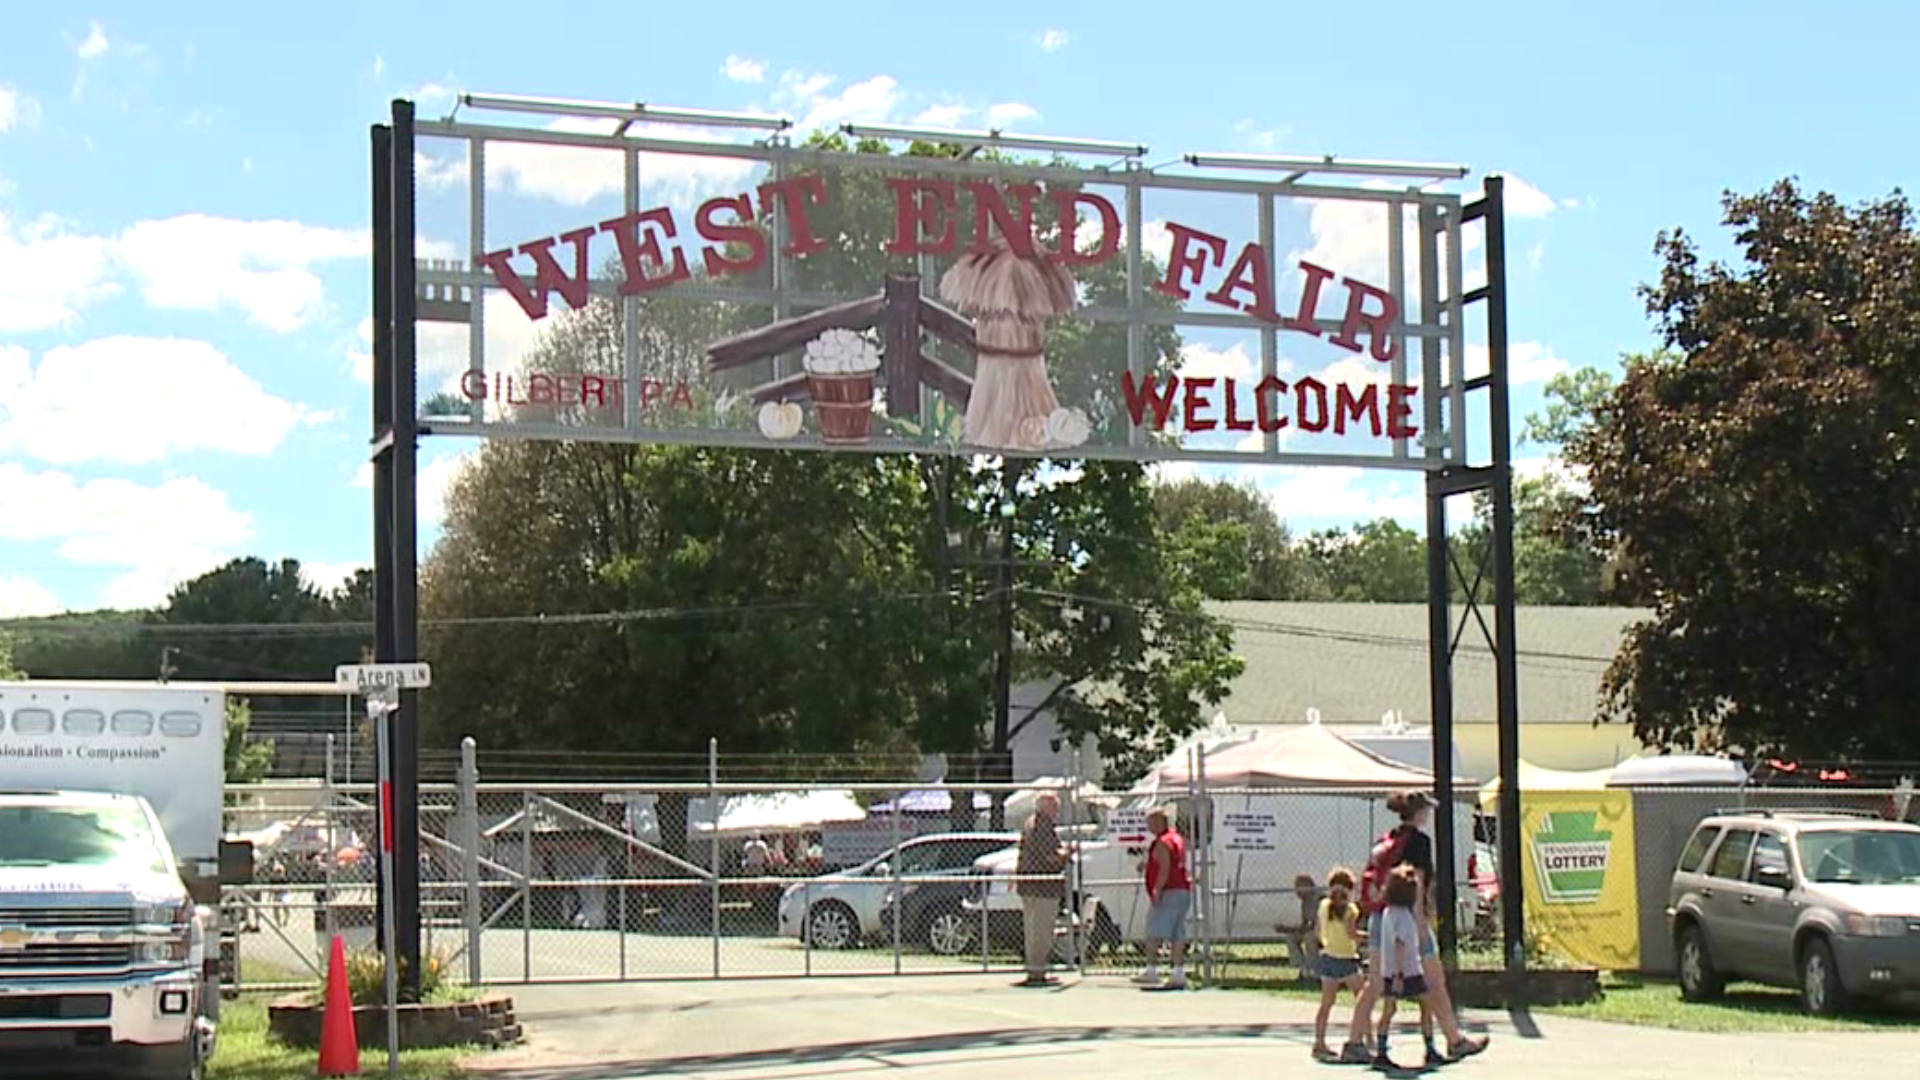 Some other fairs in our area will not go on as planned this year. The West End Fair in Monroe County is one of them and for vendors, it's another blow.